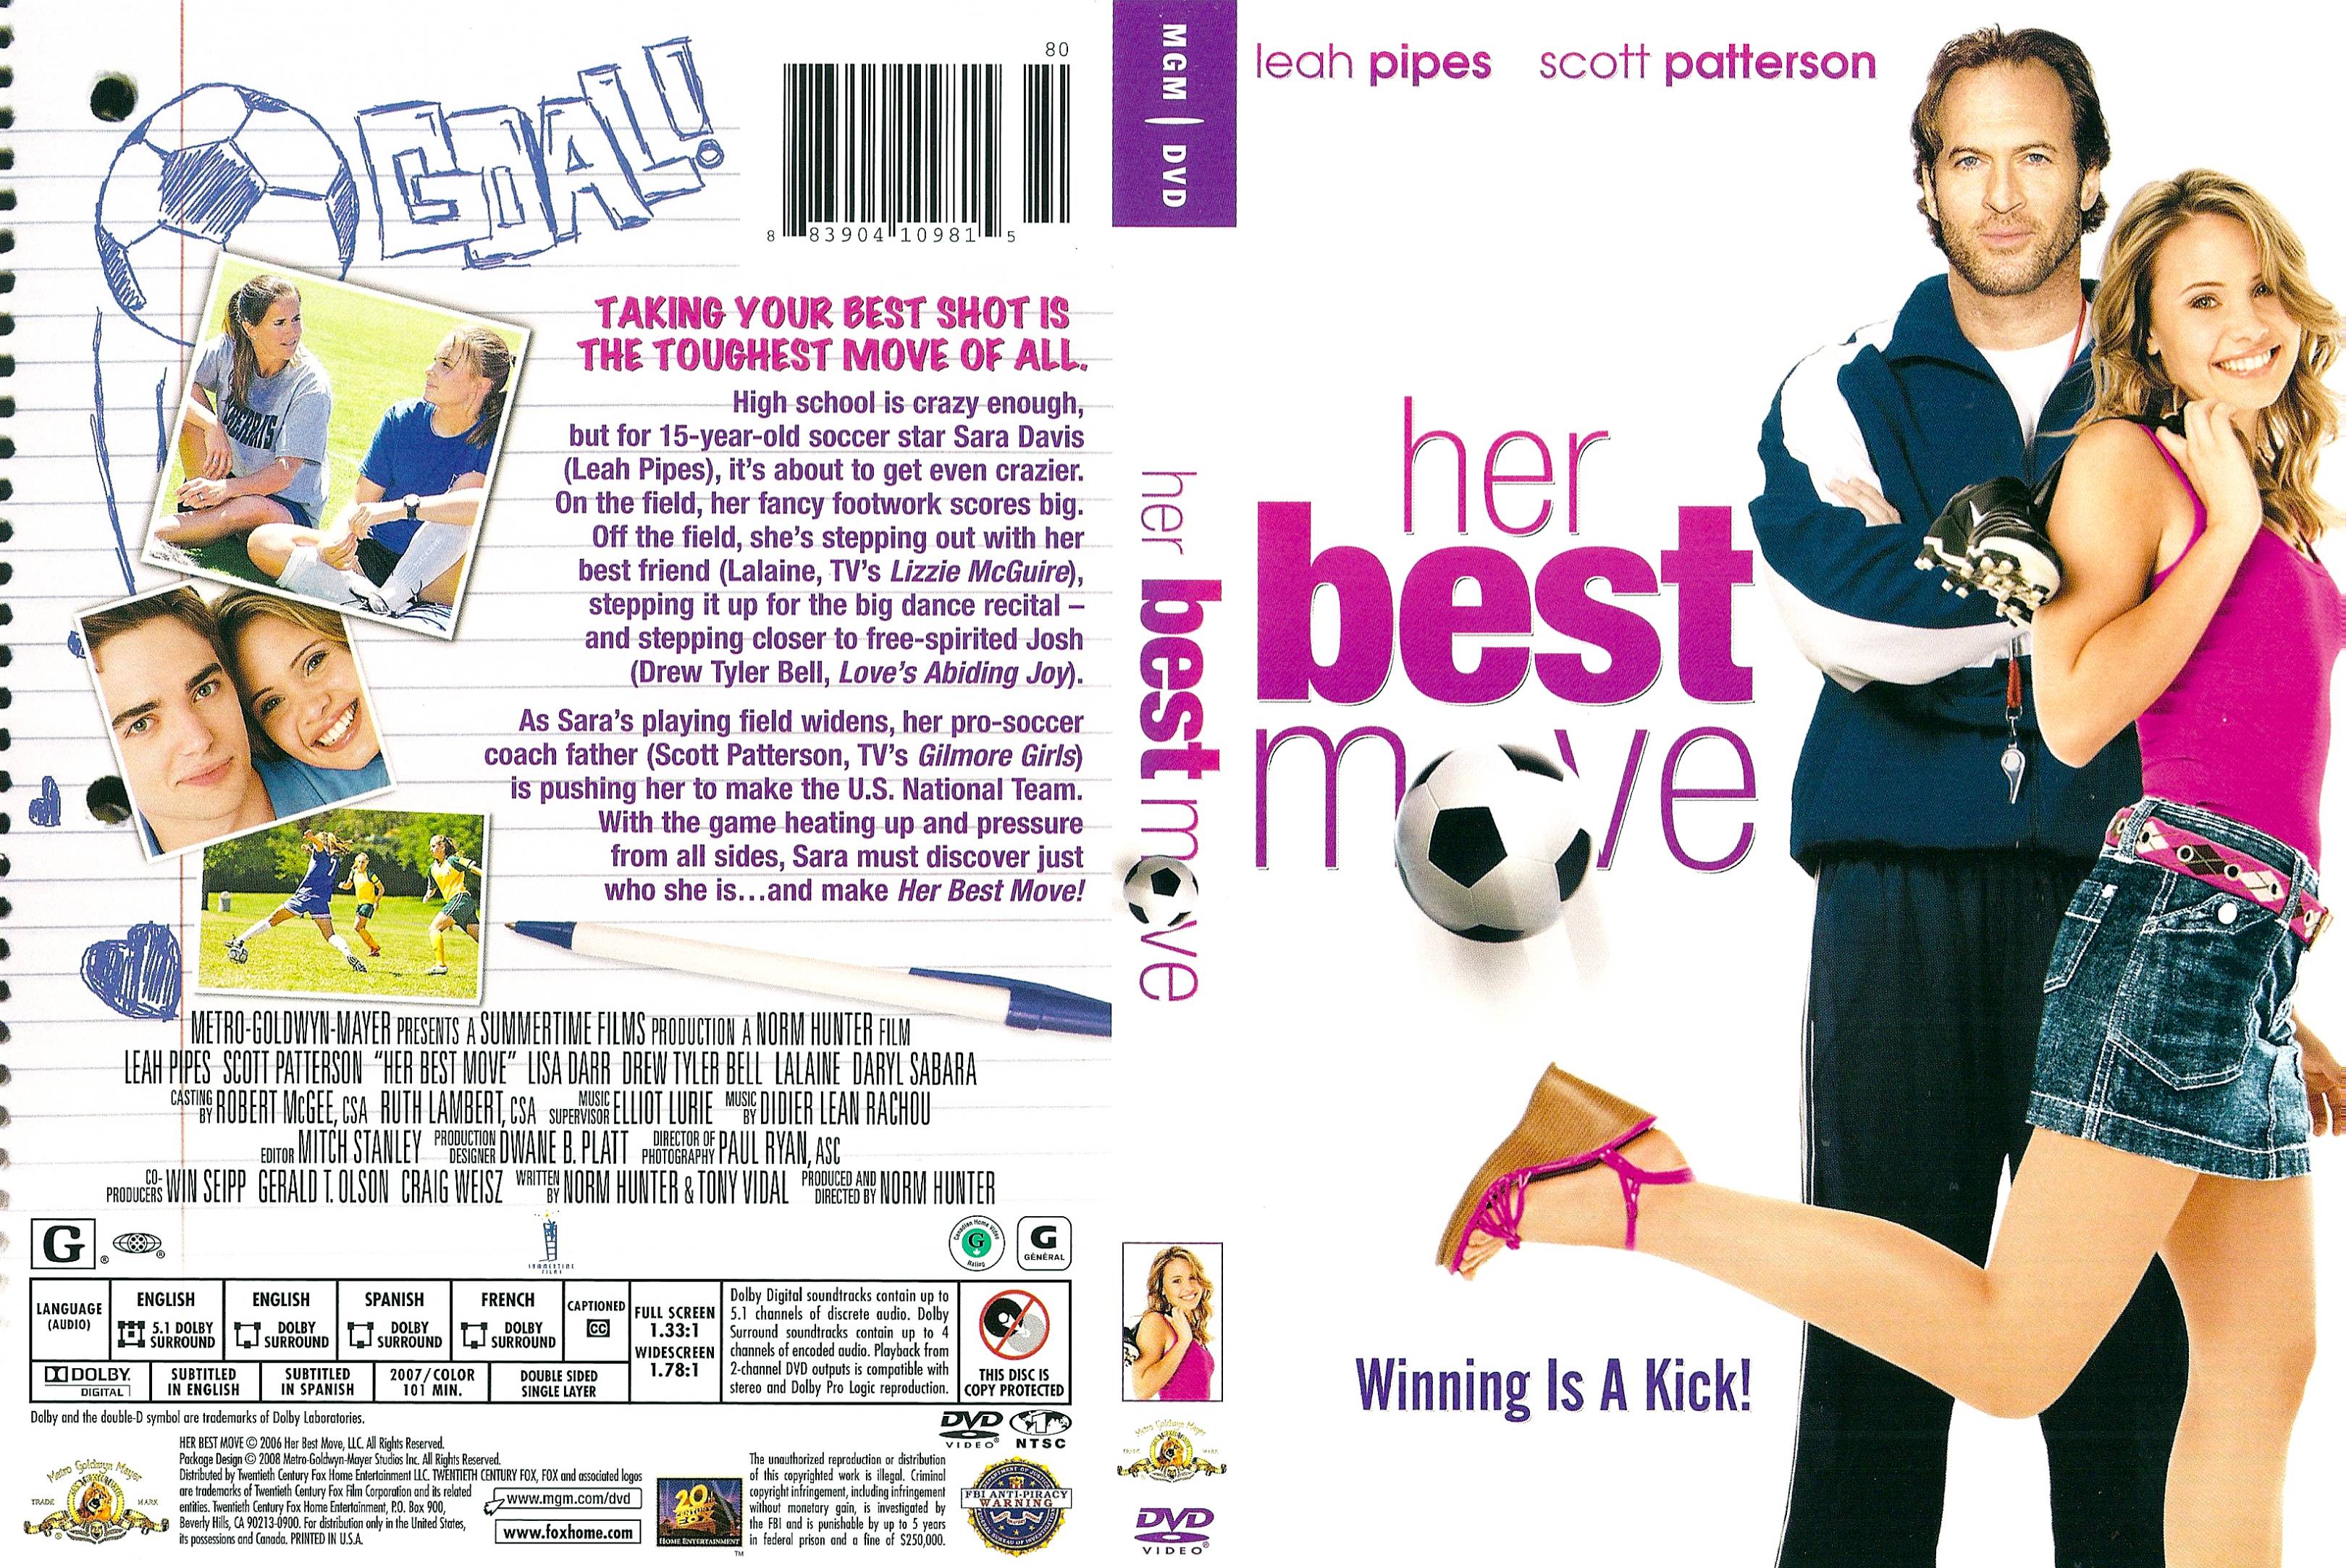 Who her best friend. Here with me DVD обложка. Скотт Паттерсон кванты. The best move.